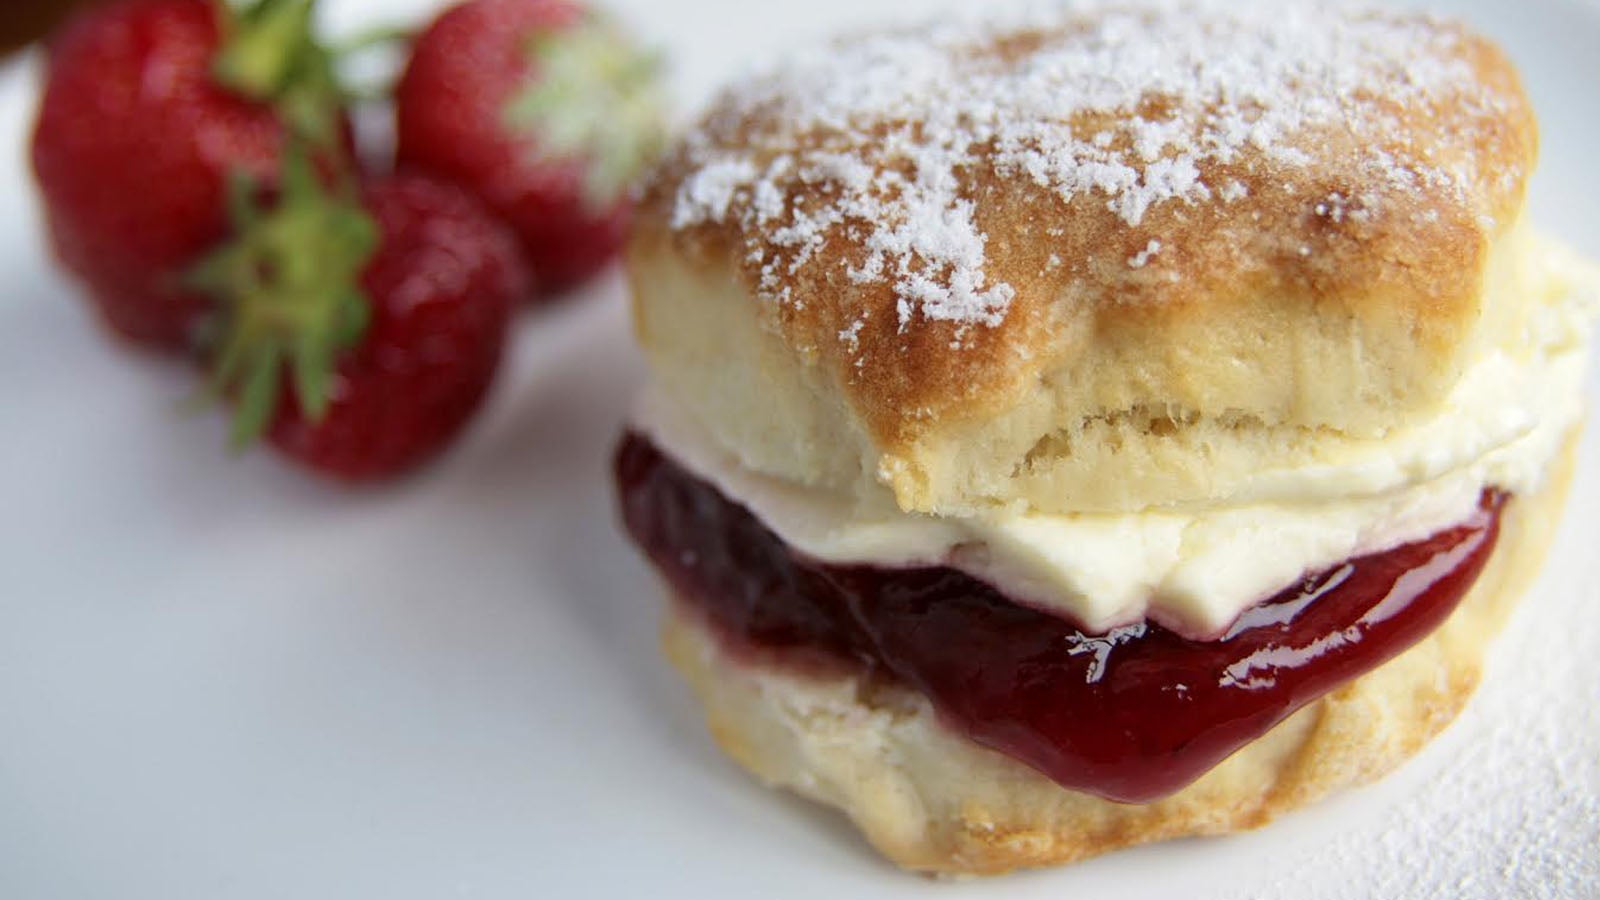 Scone with clotted cream and jam